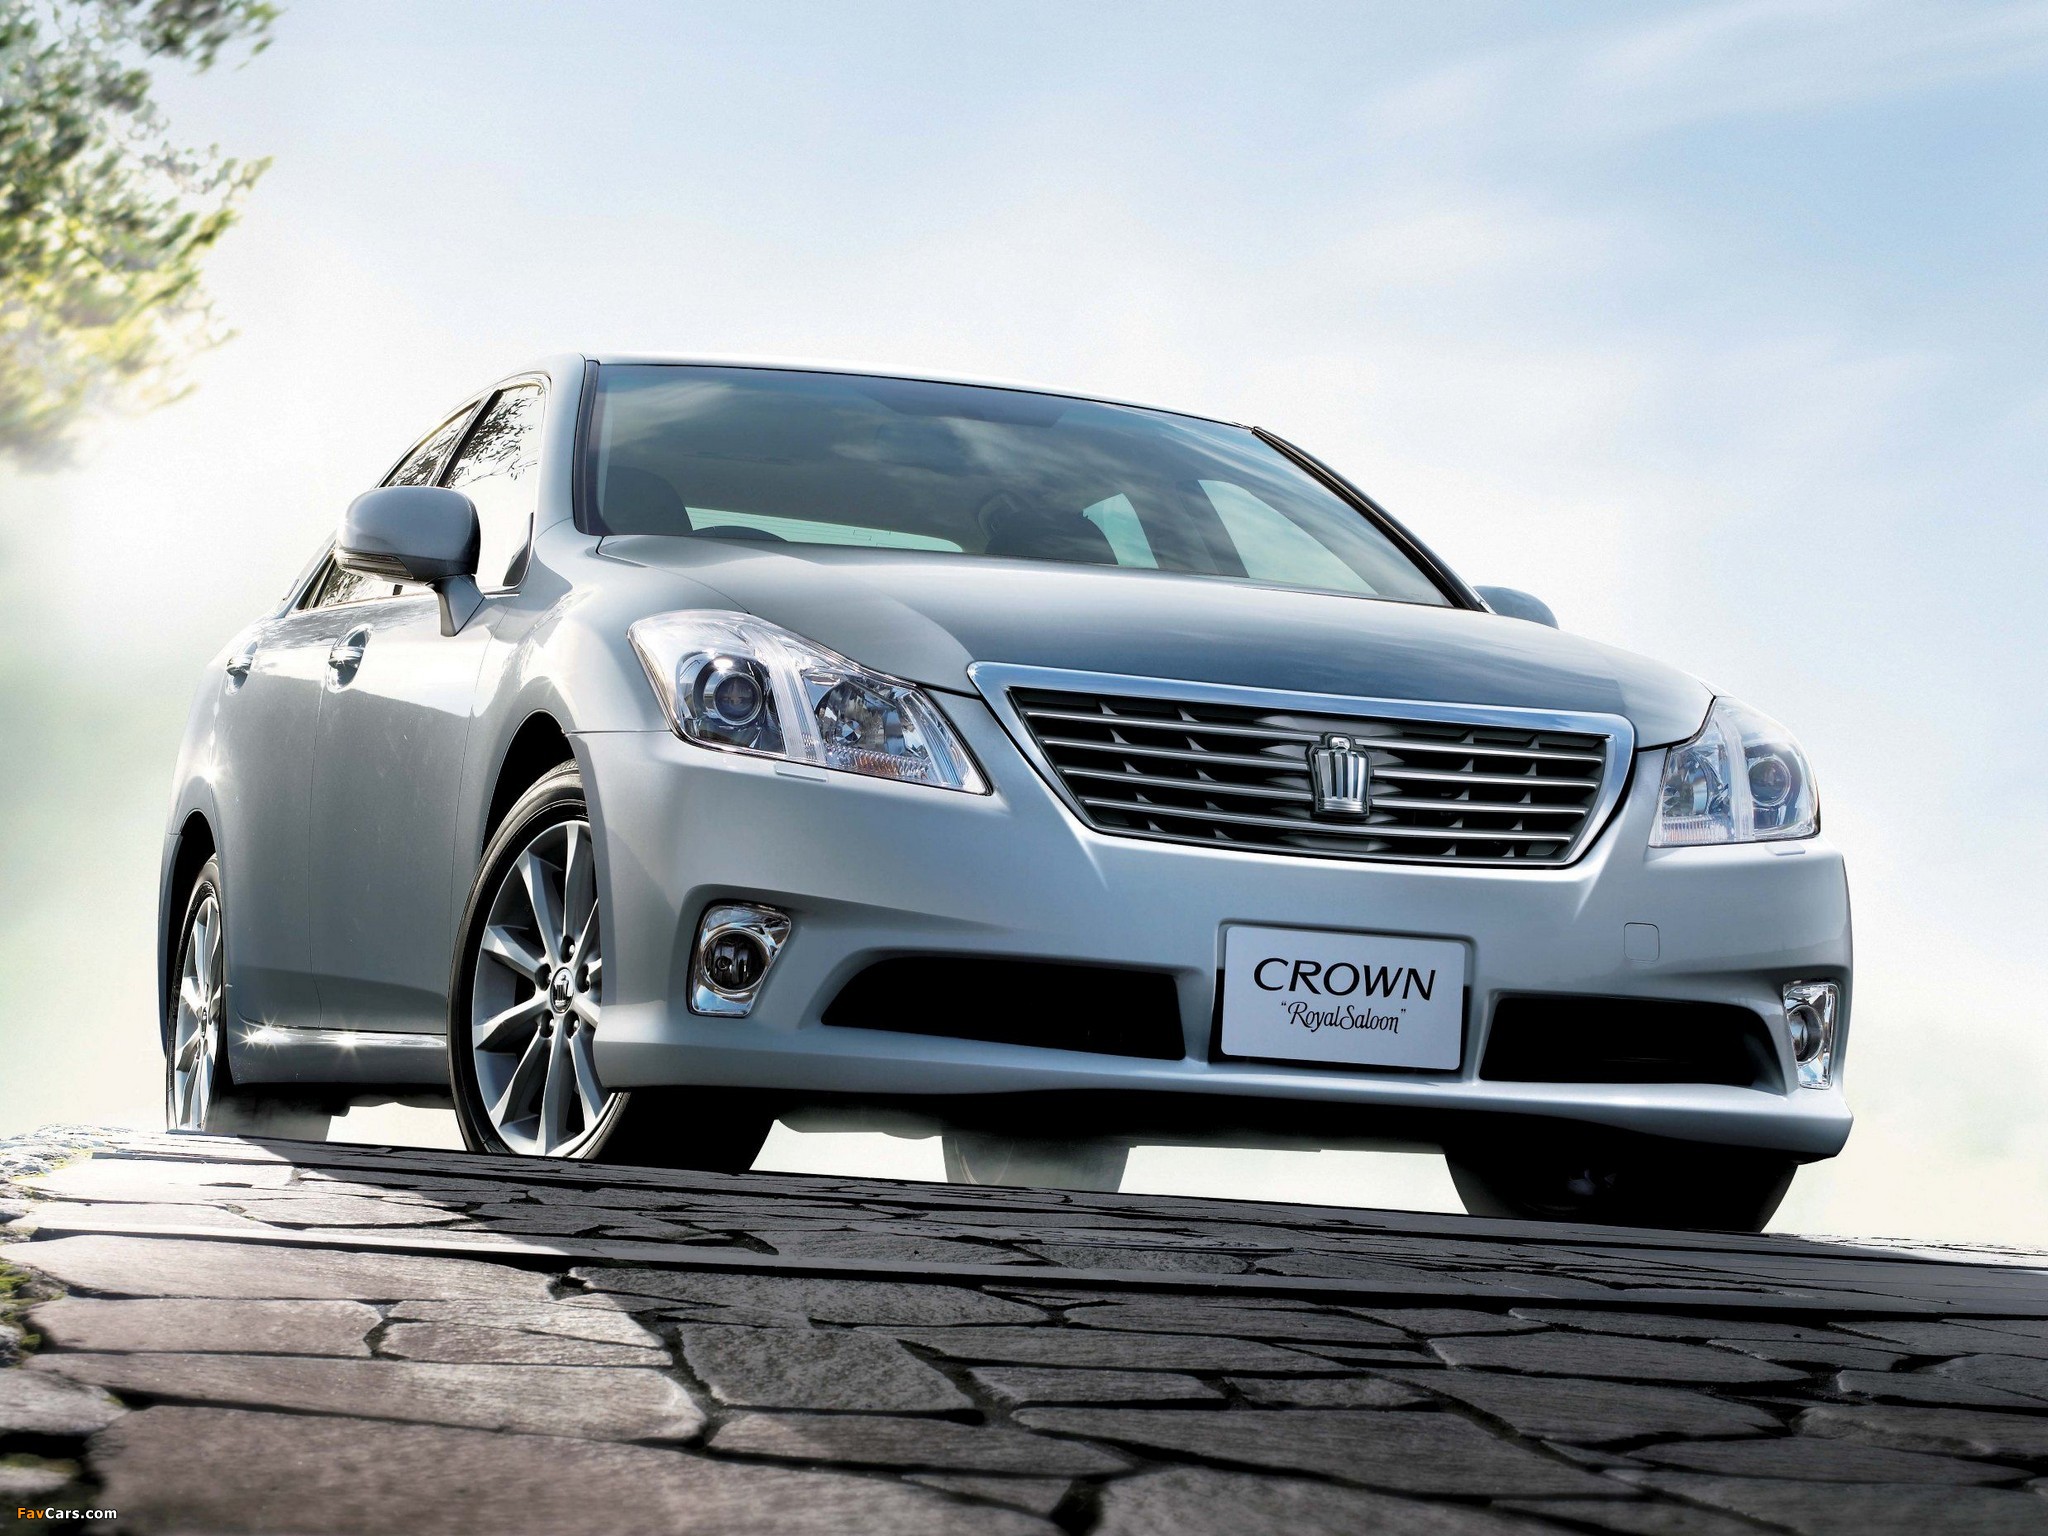 Toyota Crown Royal Saloon (S200) 2010 images (2048 x 1536)